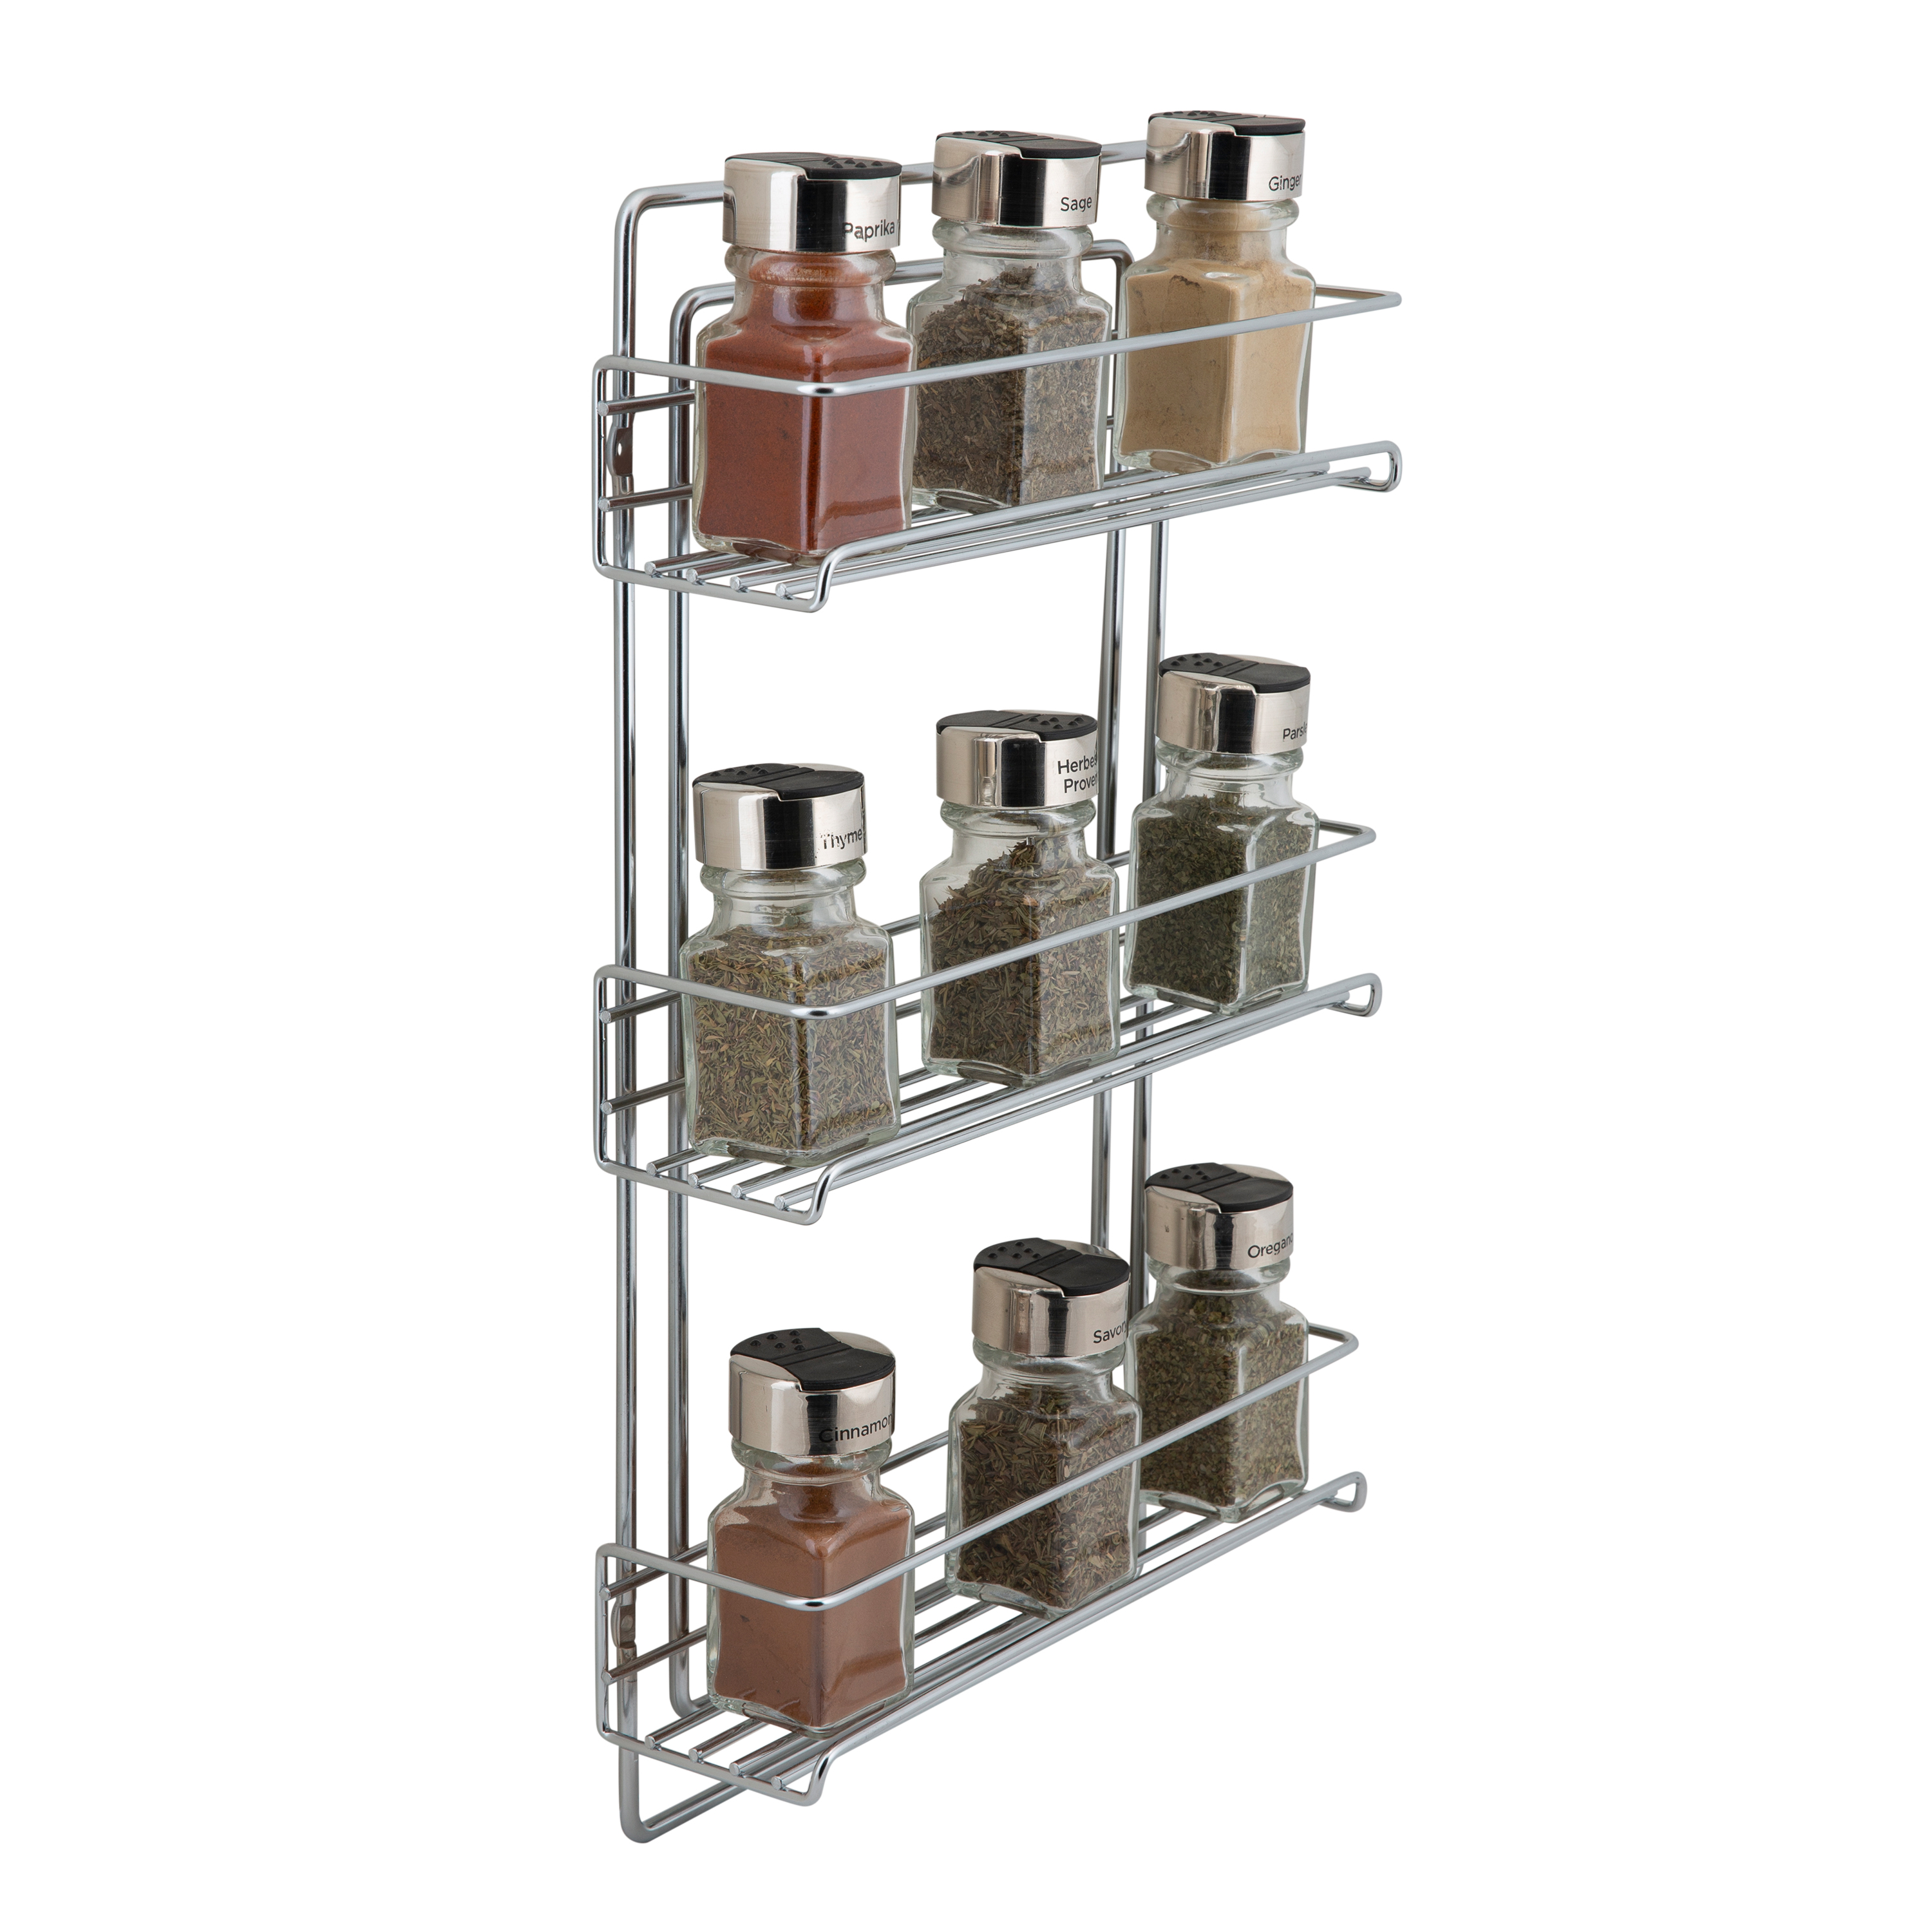 Organize It All 3 Tier Wall Mountable Spice Rack in Chrome - image 3 of 6